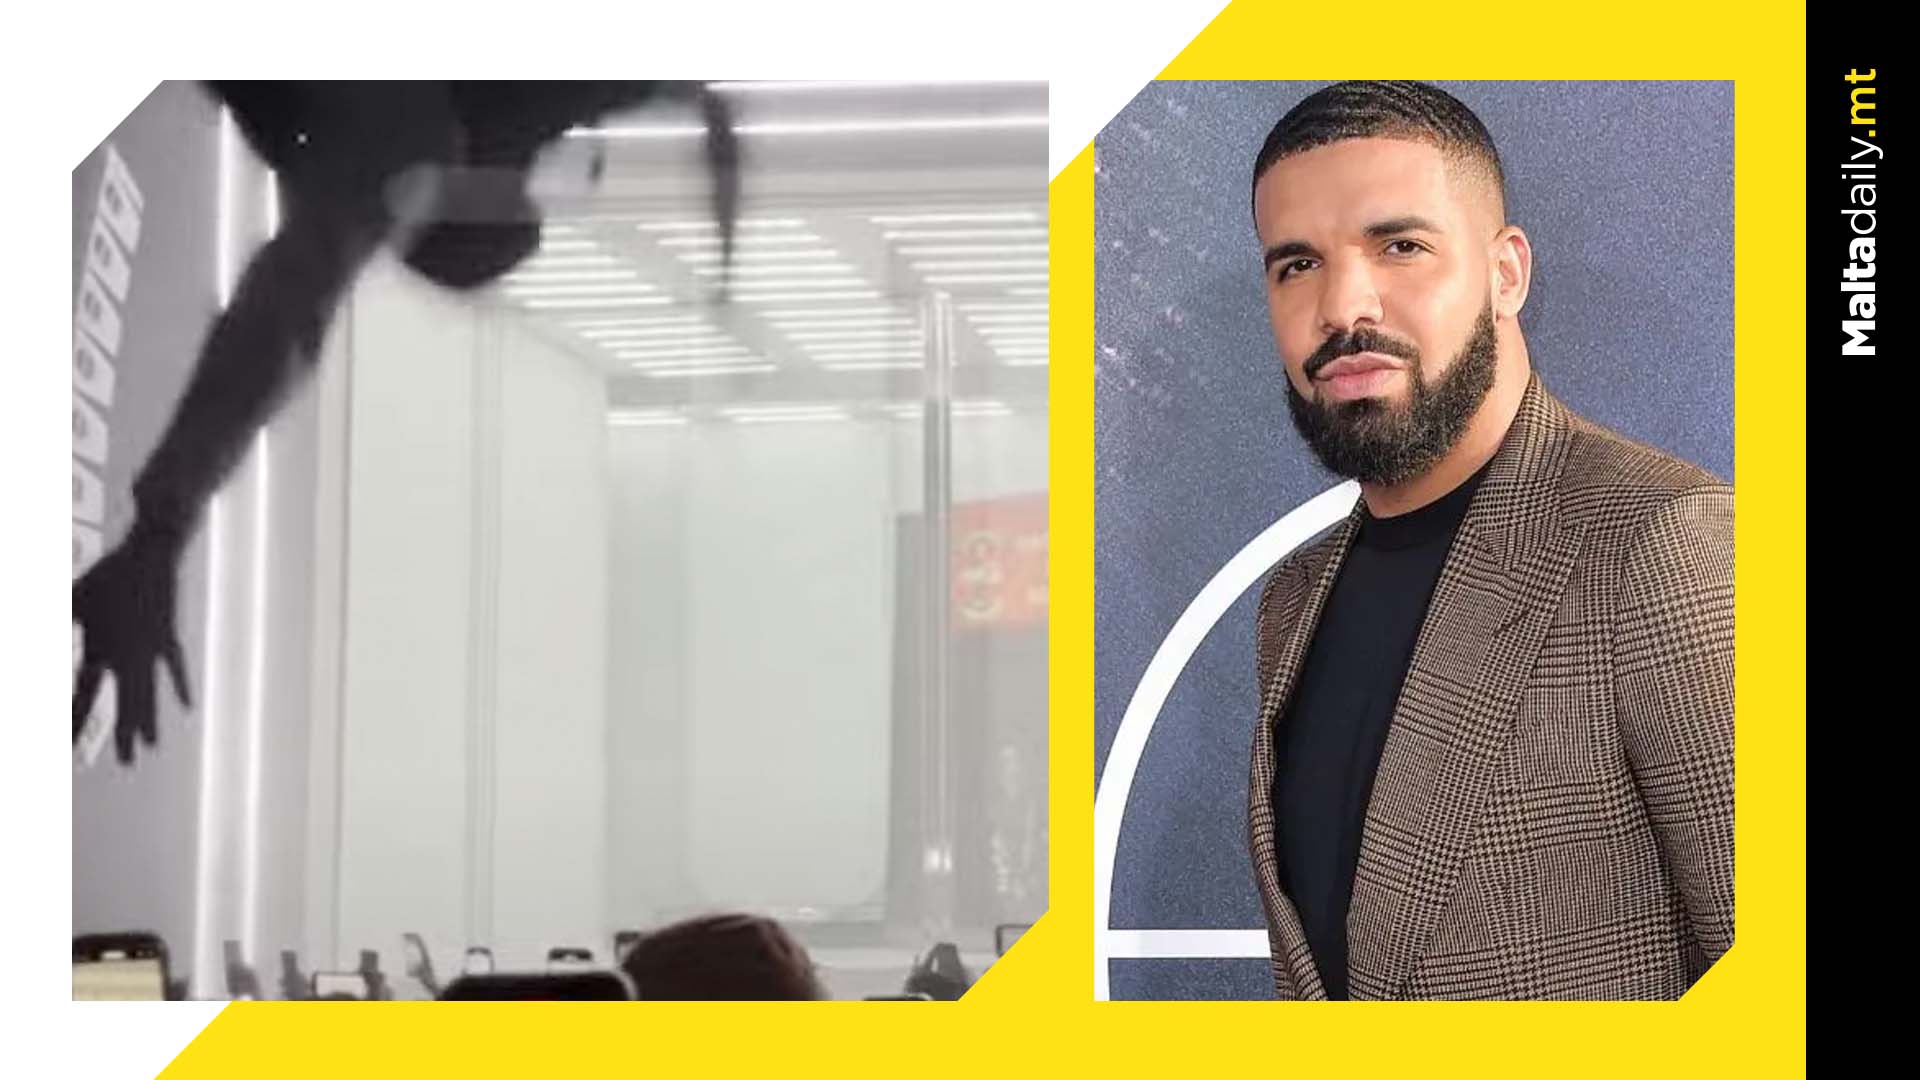 Drake forced to pause show after fan falls off balcony